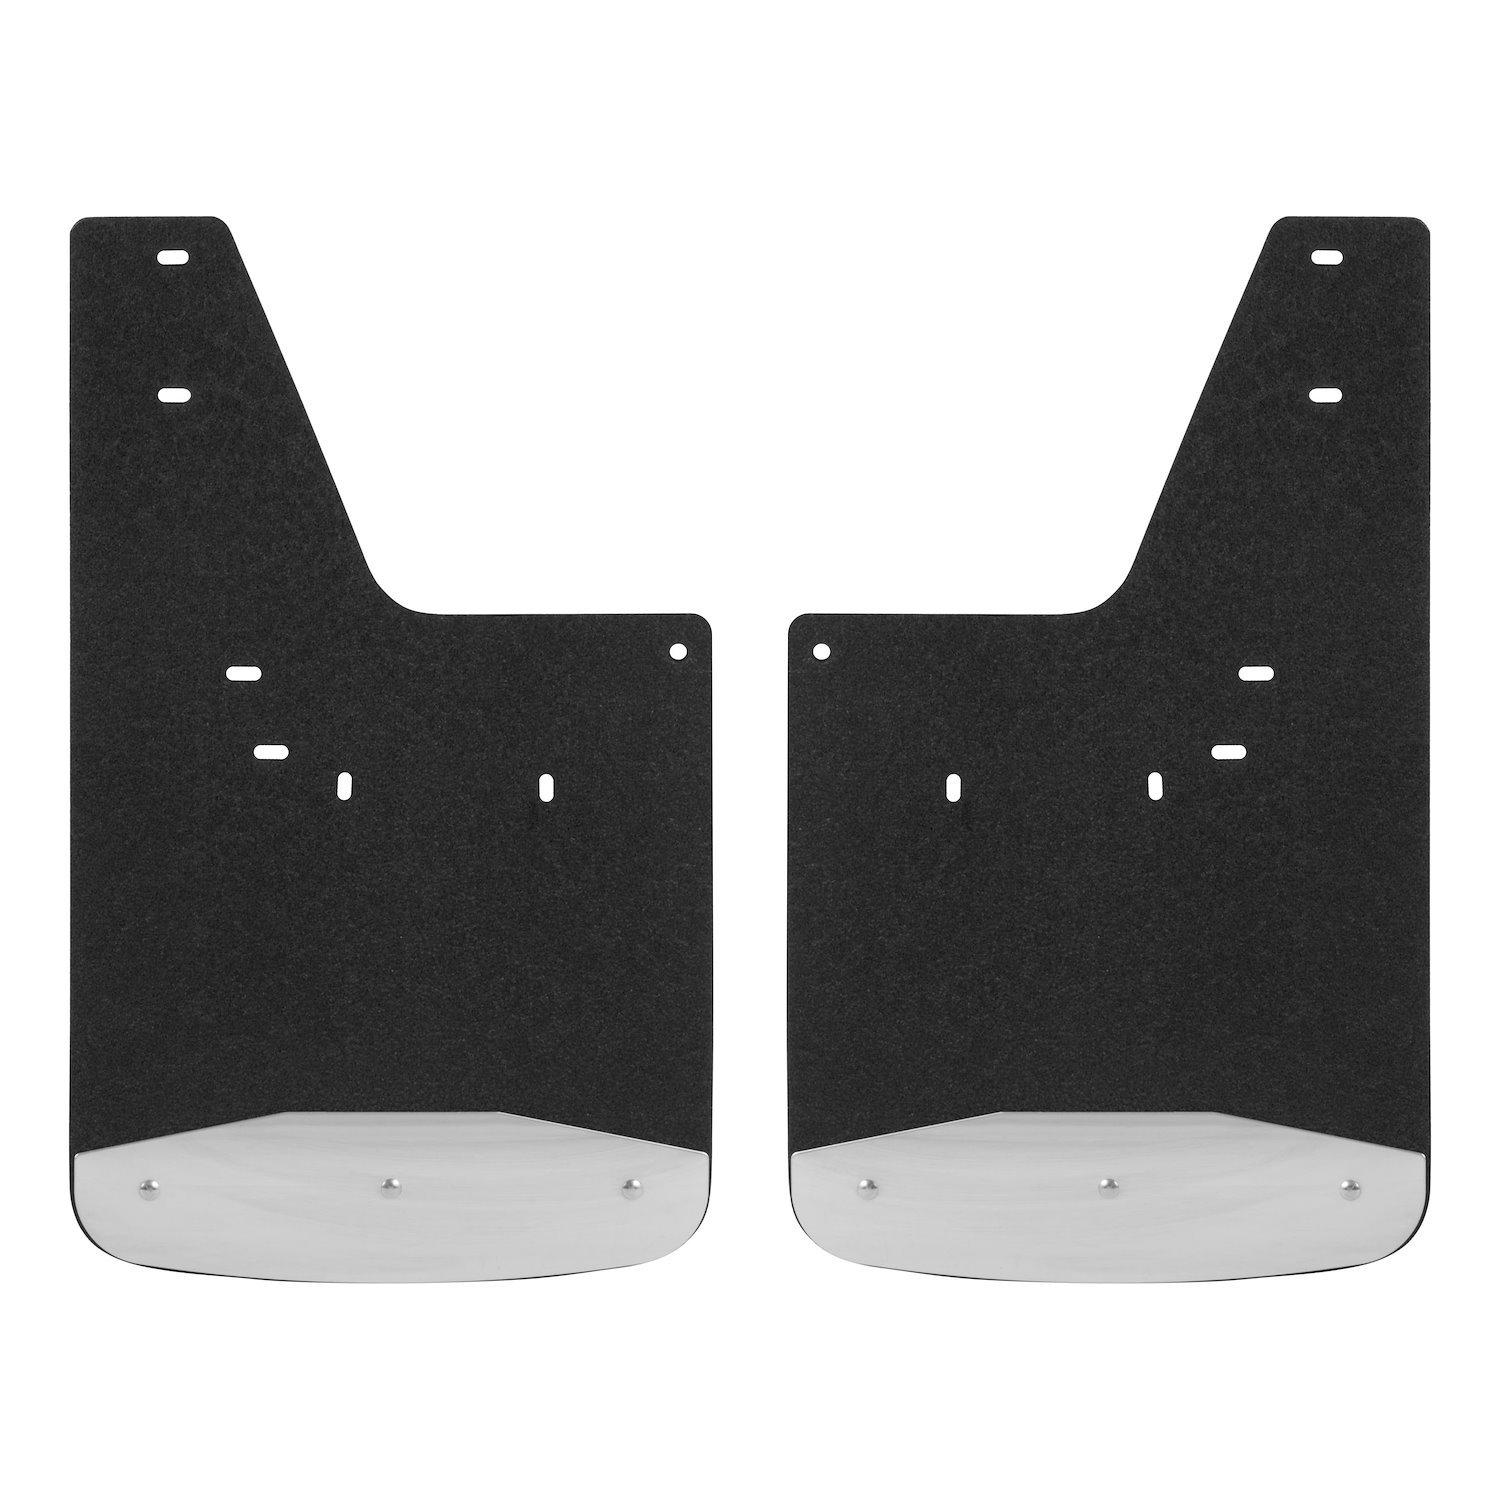 250930 Front 12 in. x 20 in. Rubber Mud Guards Fits Select Dodge, Ram 1500, 2500, 3500